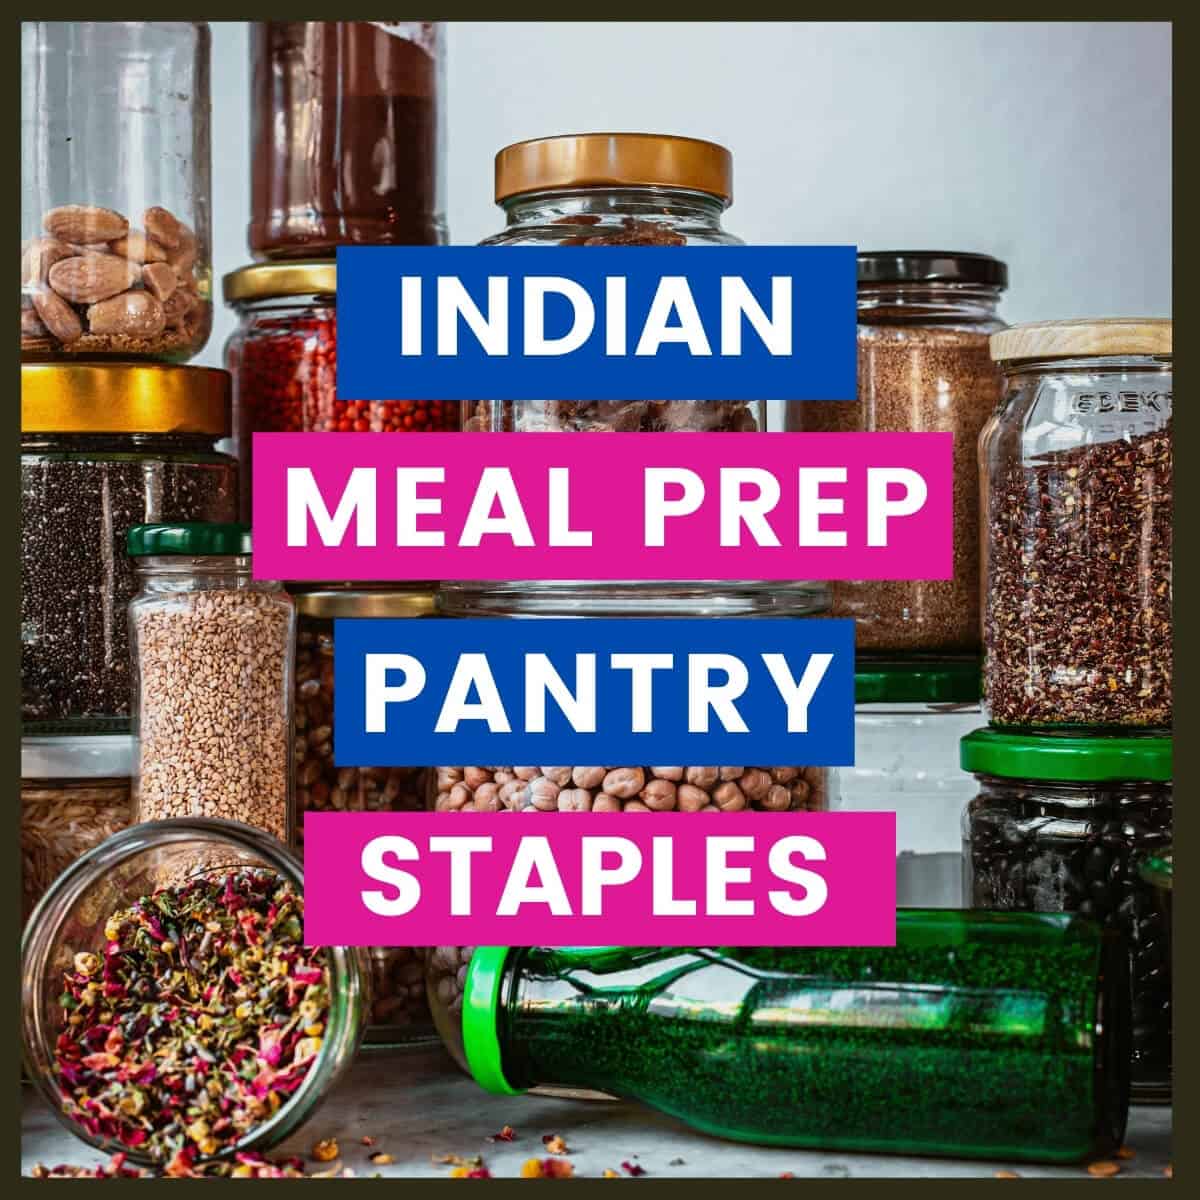 Variety of pulses with caption Indian Meal Prep Pantry Staples